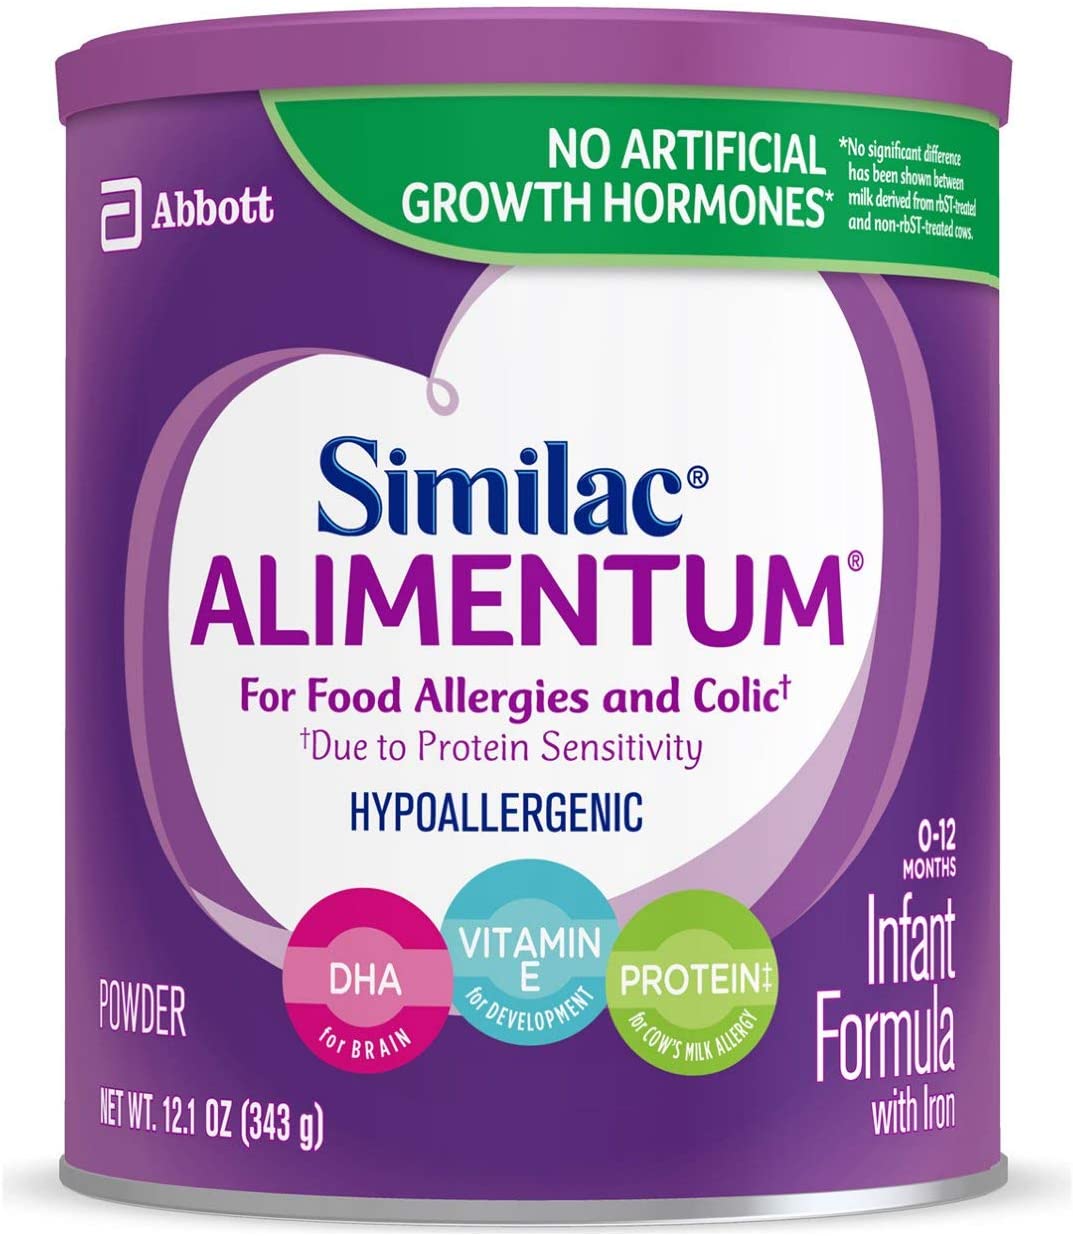 Similac Alimentum Hypoallergenic Baby Formula For Food Allergies and Colic, 4 Count Powder, 19.8-oz Can